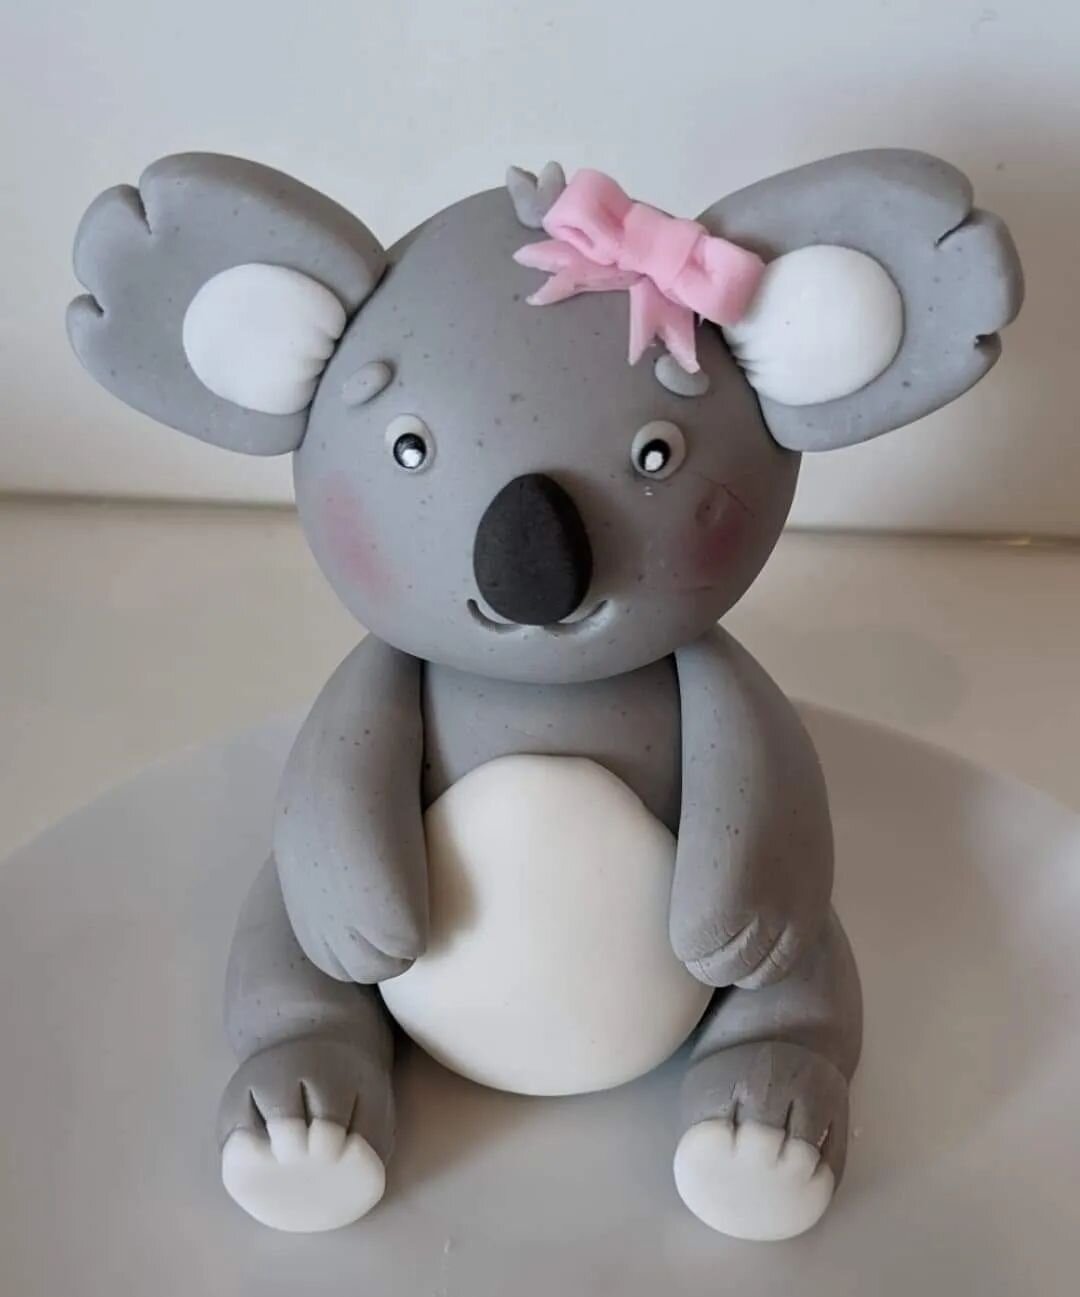 How did you spend your day today? 

I made Kylie the Koala (while sat in front of a fan) for a special little girls first birthday cake which I'm making later in the week, her Mama has already had a sneak peak so I thought I share this cutie with you